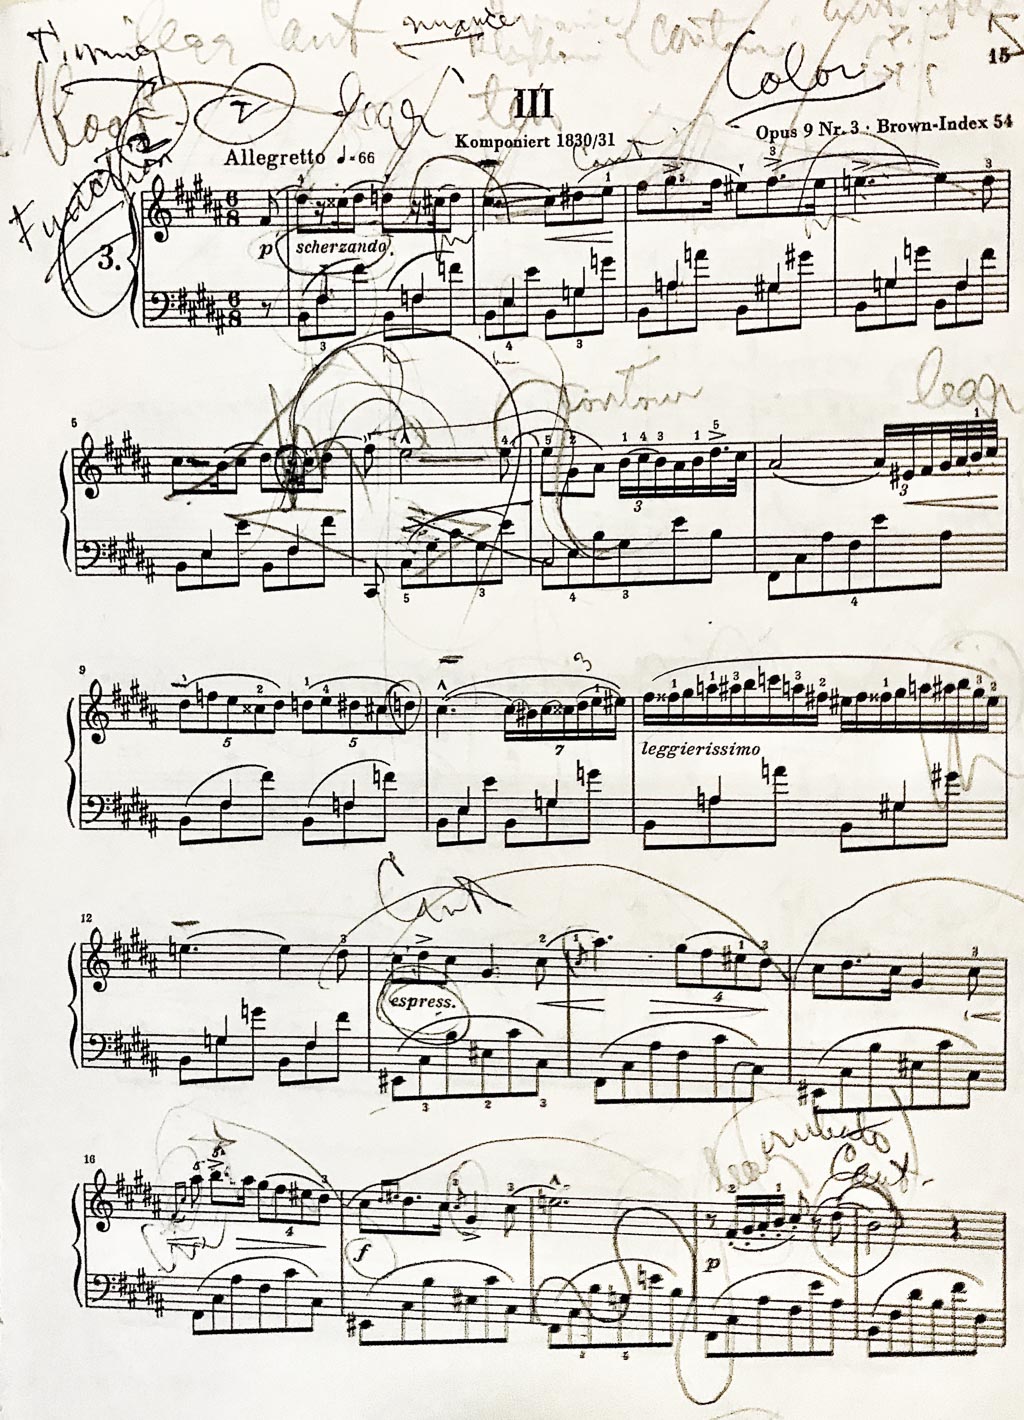 A page of music manuscript (Chopin Nocturne Opus 90 Number 3) with instructional markings in various colors, by Harold Zabrack.